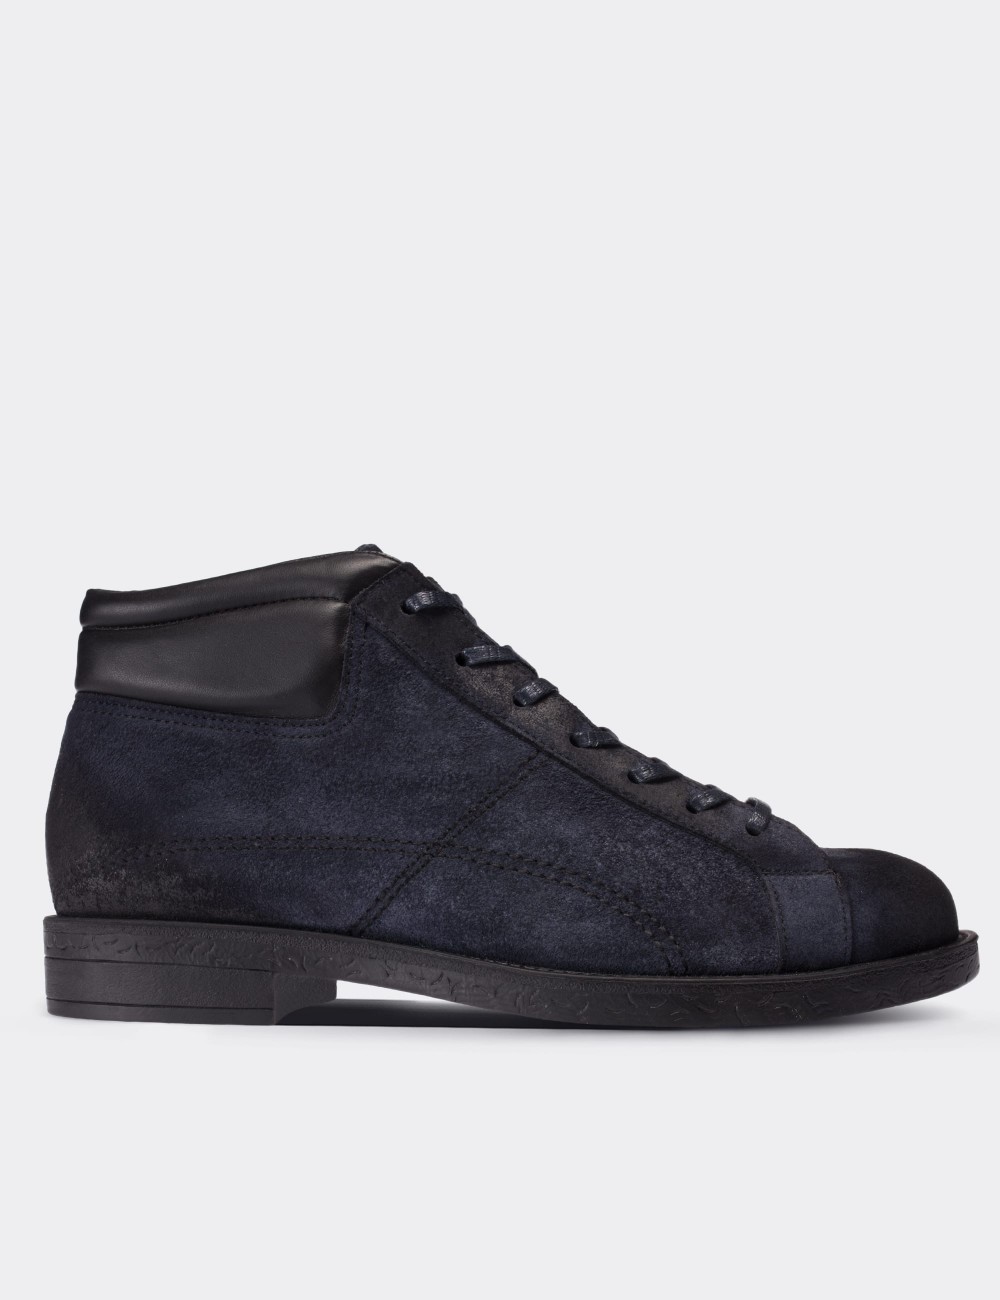 Navy Suede Leather Boots - 01760MLCVC03